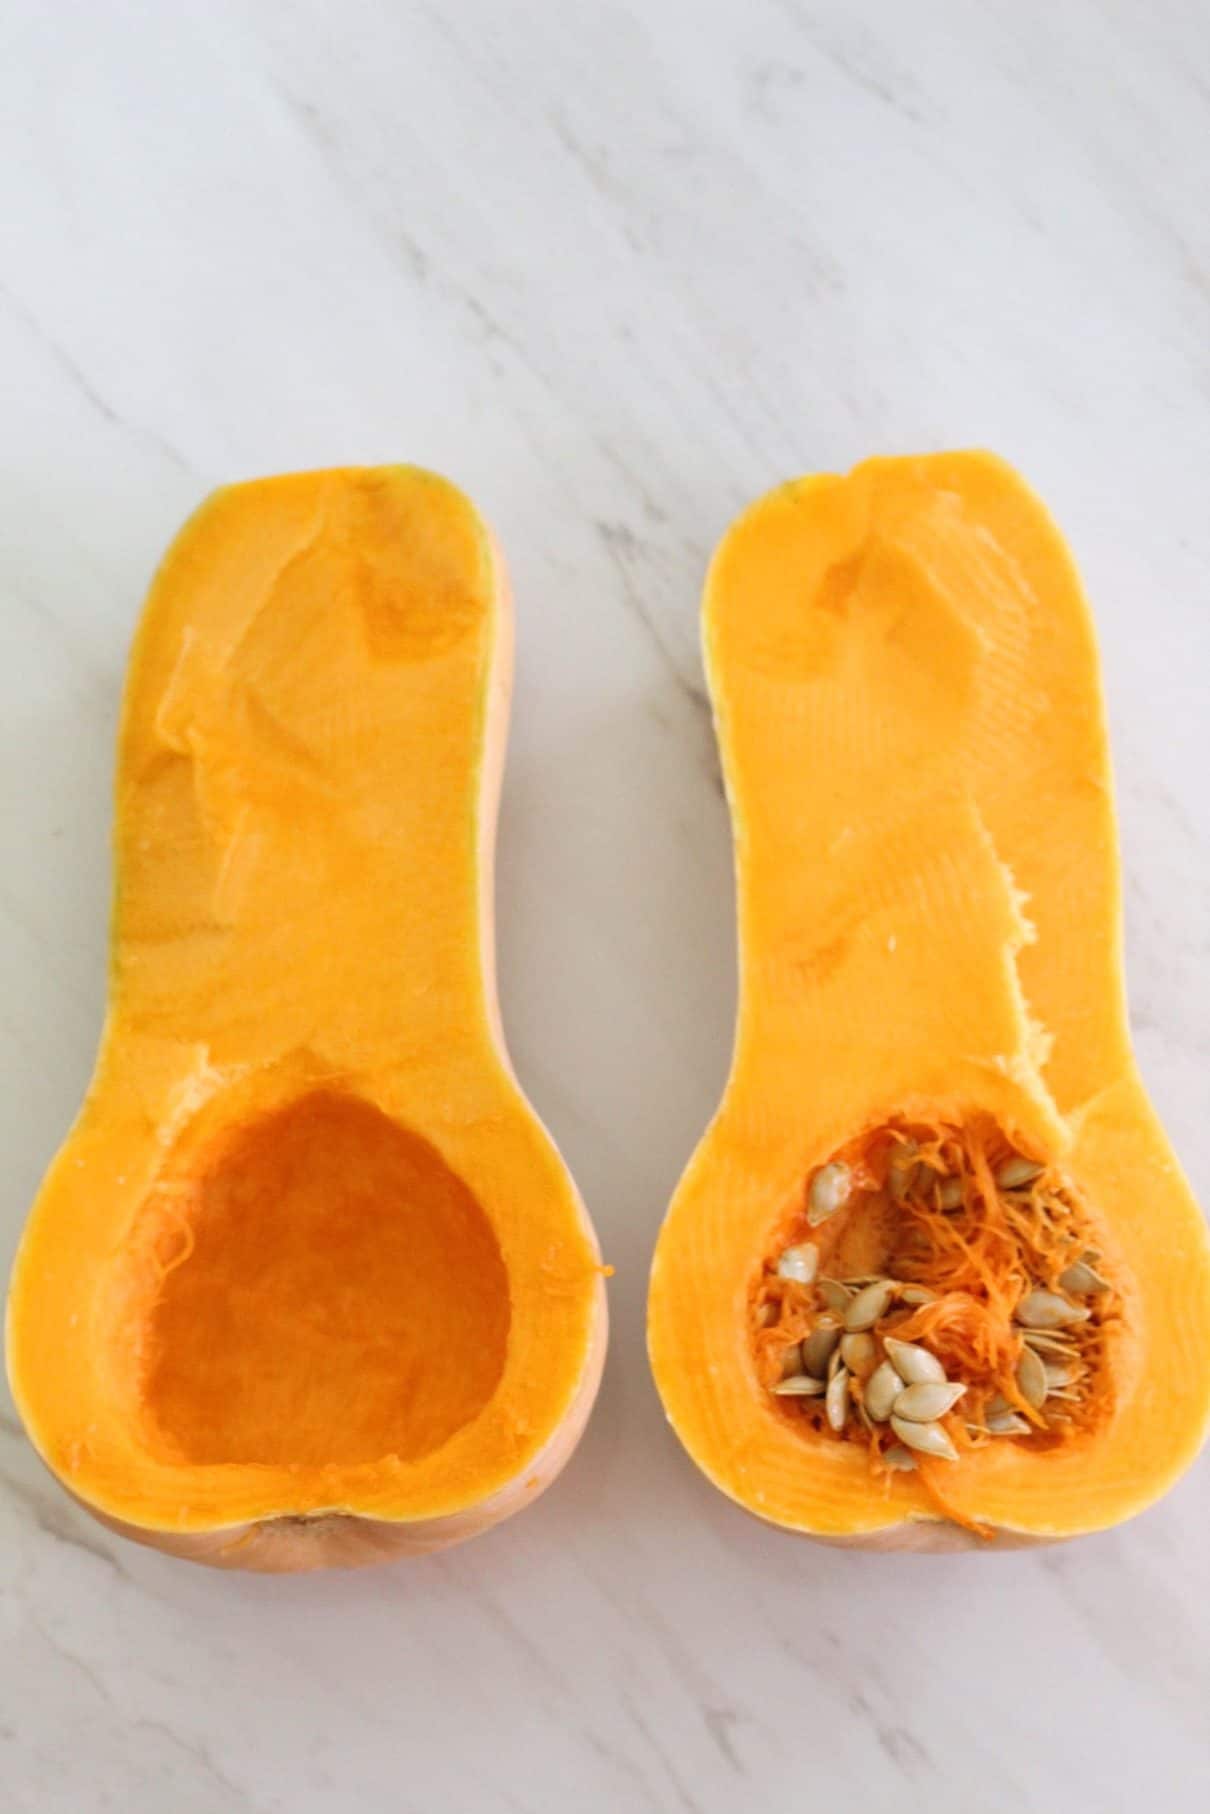 A butternut squash cut in half, one half is already cleaned from seeds and pulp but the other half not.